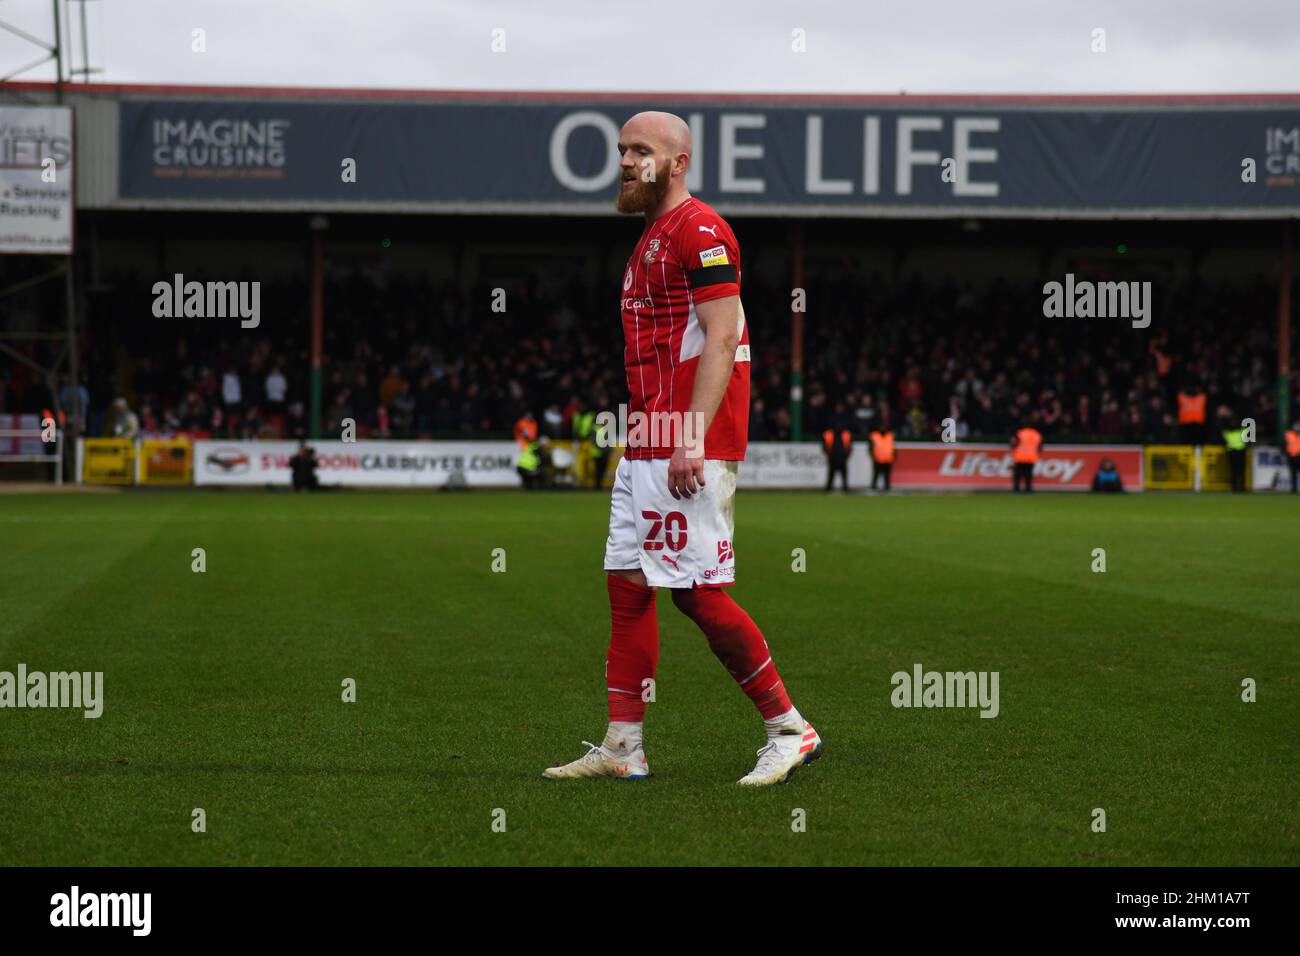 Swindon Town / Exeter City, EFL Sky Bet League Two Foto Stock